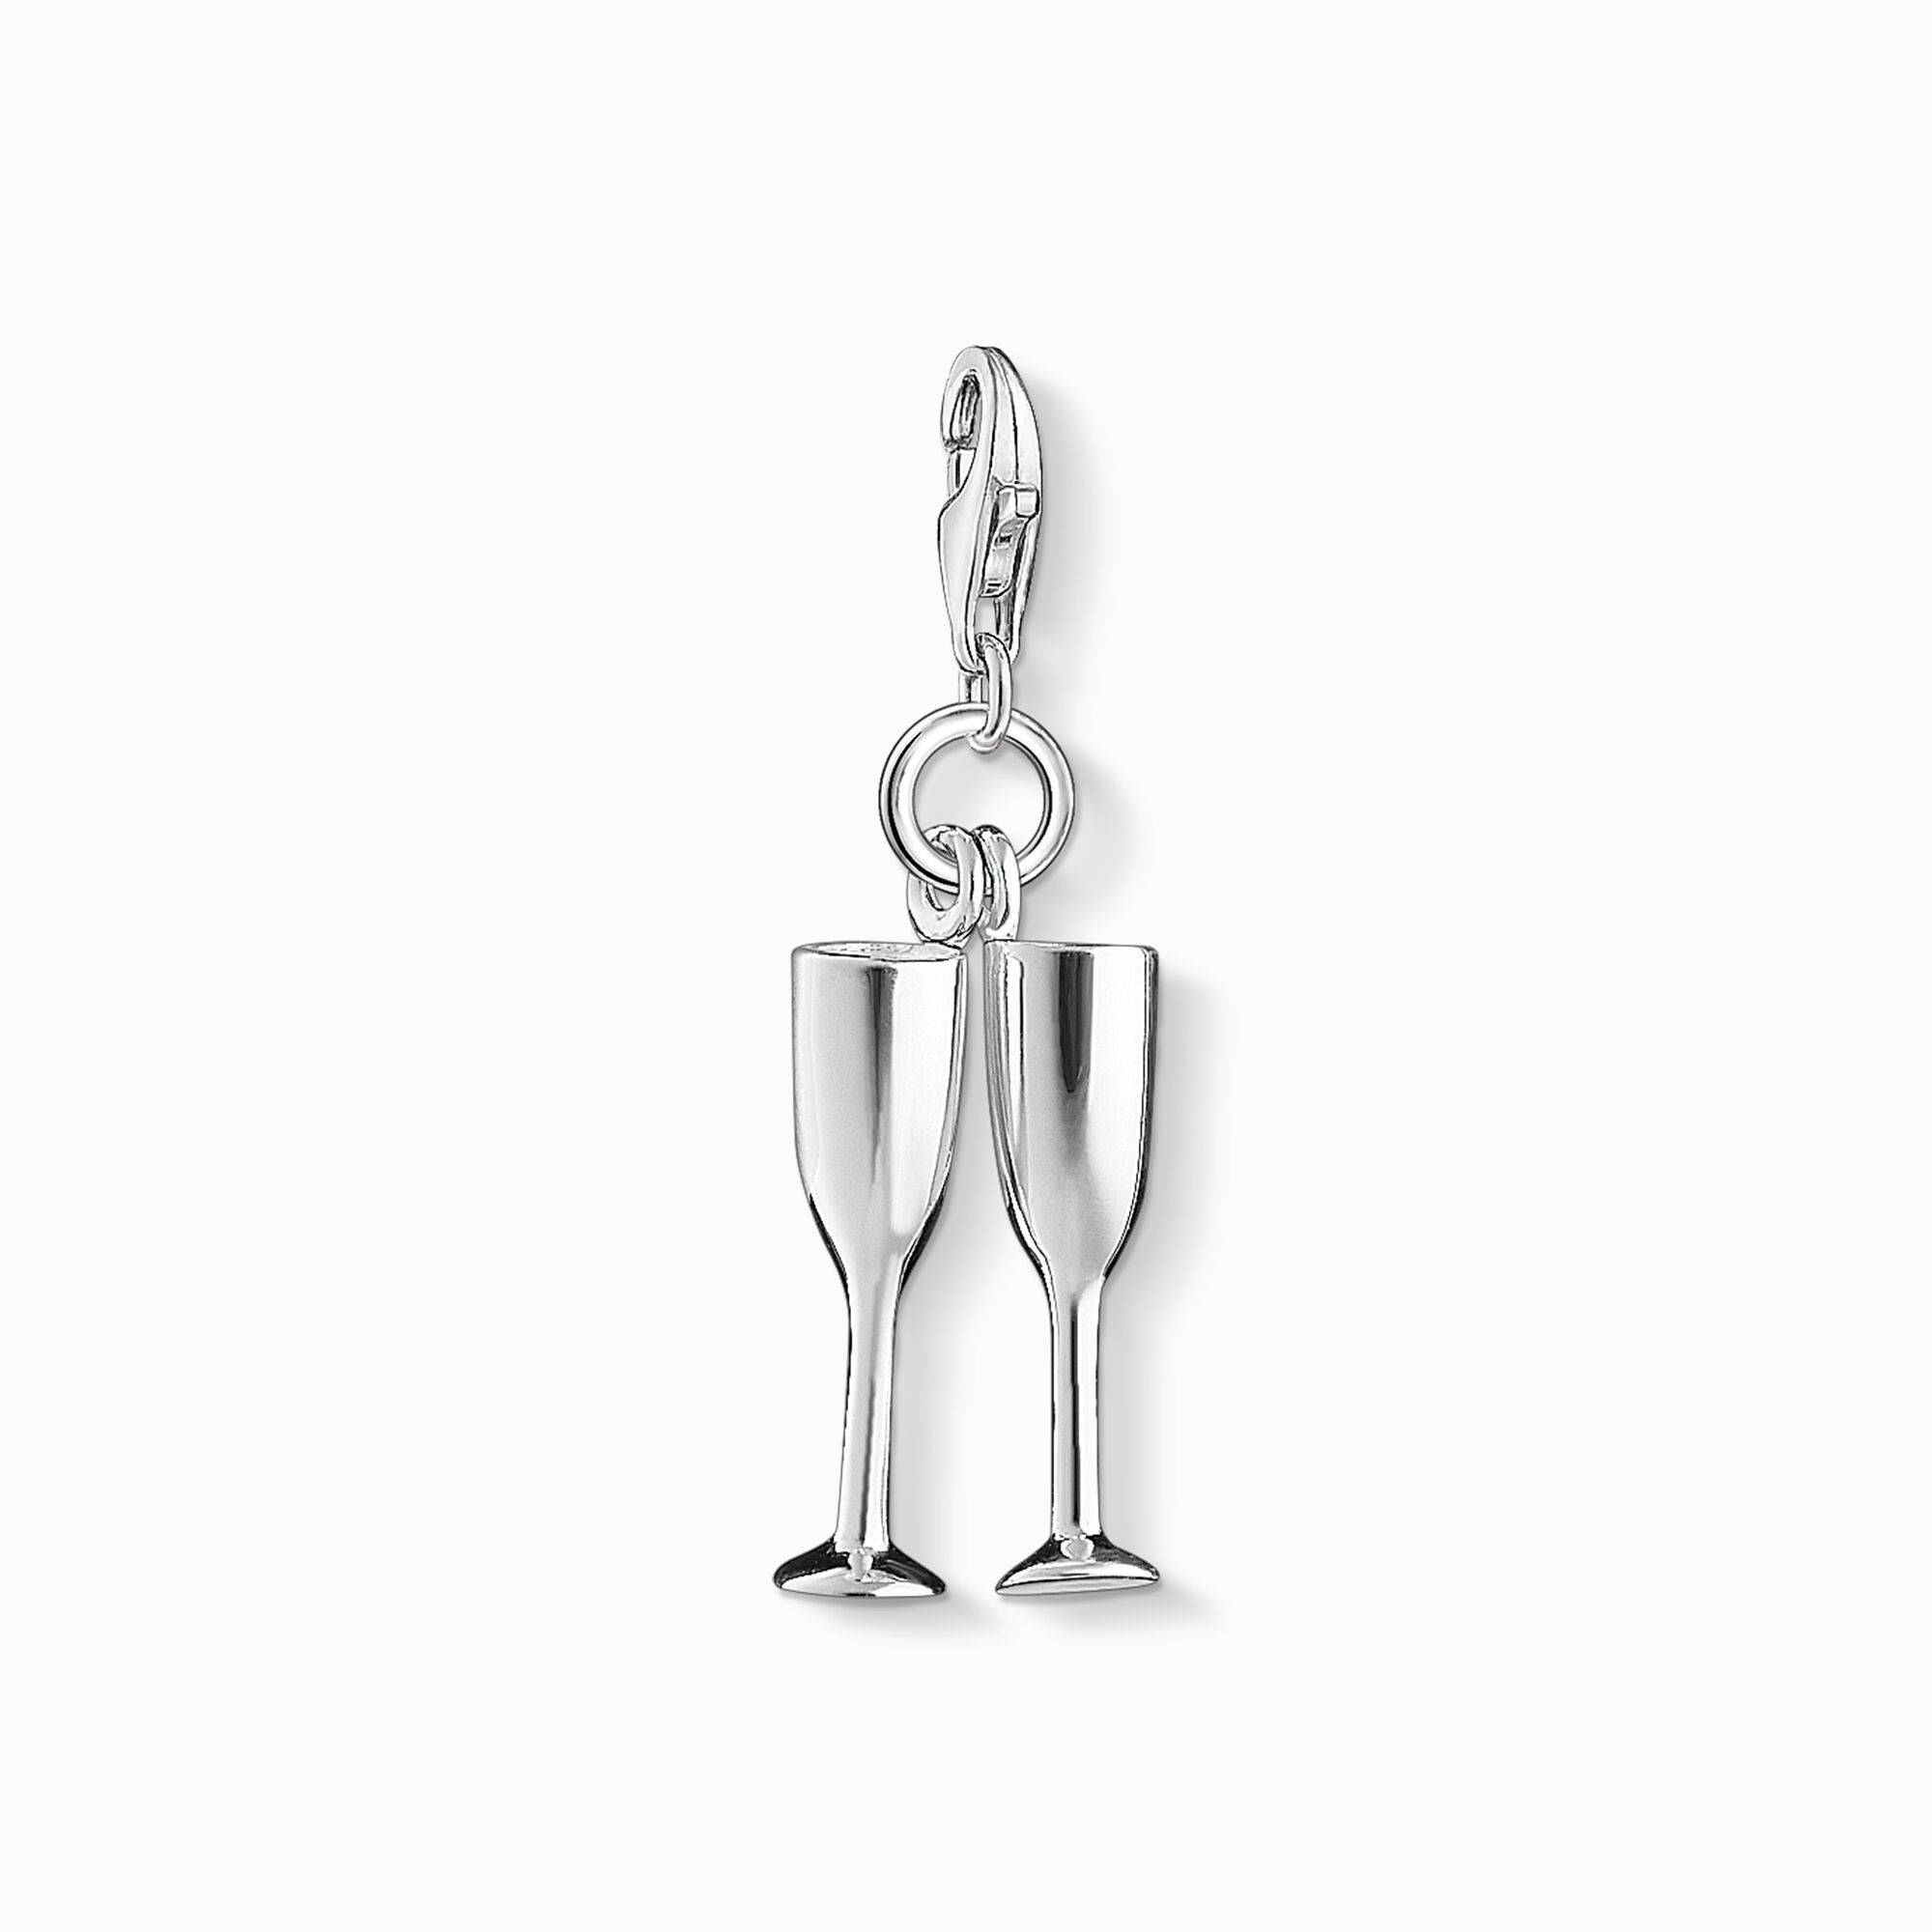 Charm pendant champagne glasses from the Charm Club collection in the THOMAS SABO online store